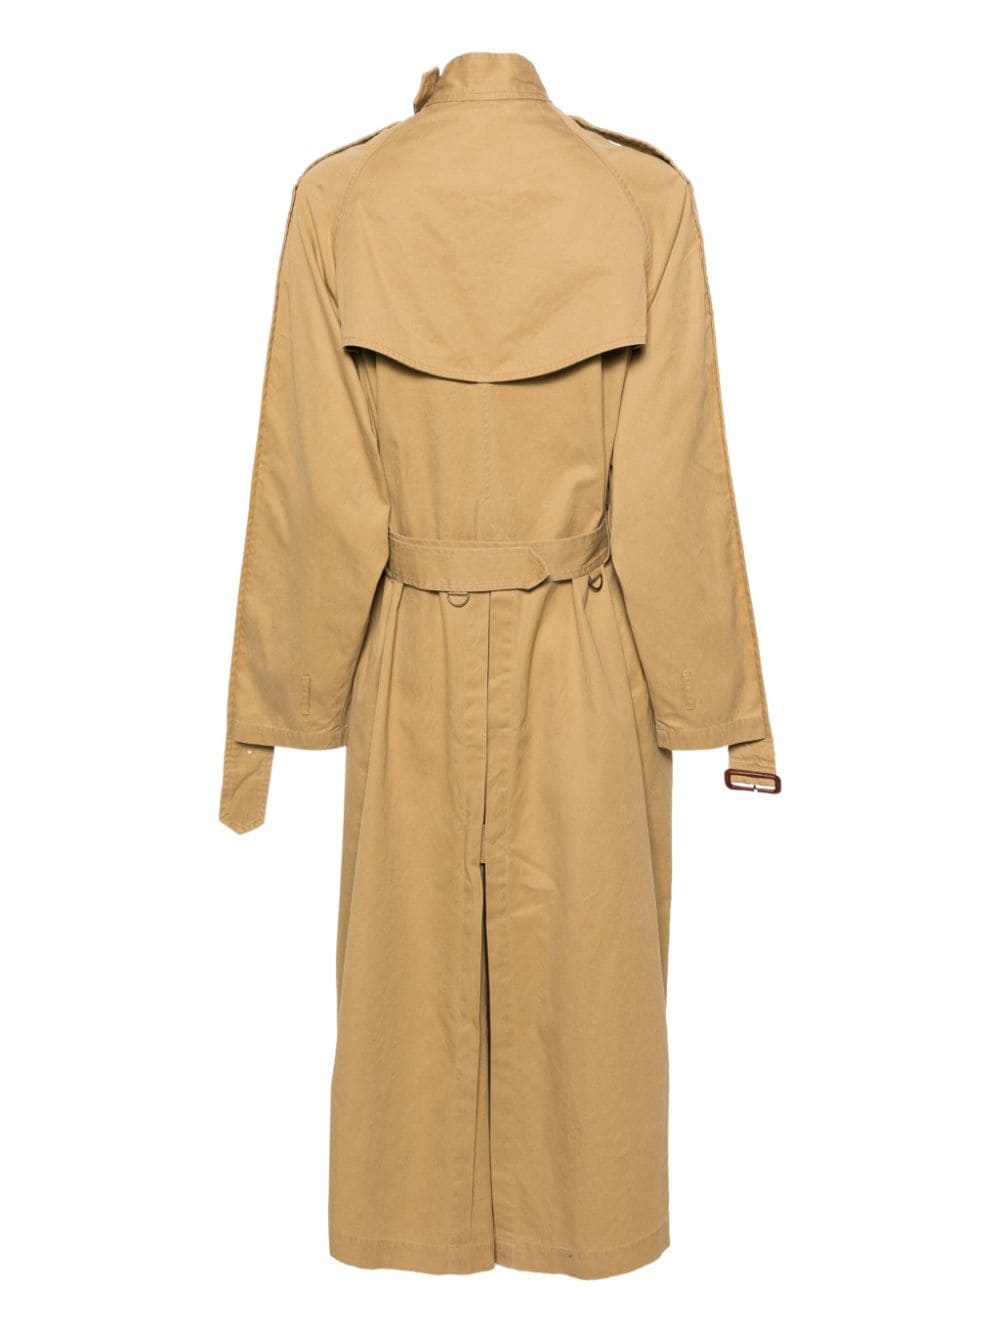 R13 decorative-belts double-breasted trench coat - Beige